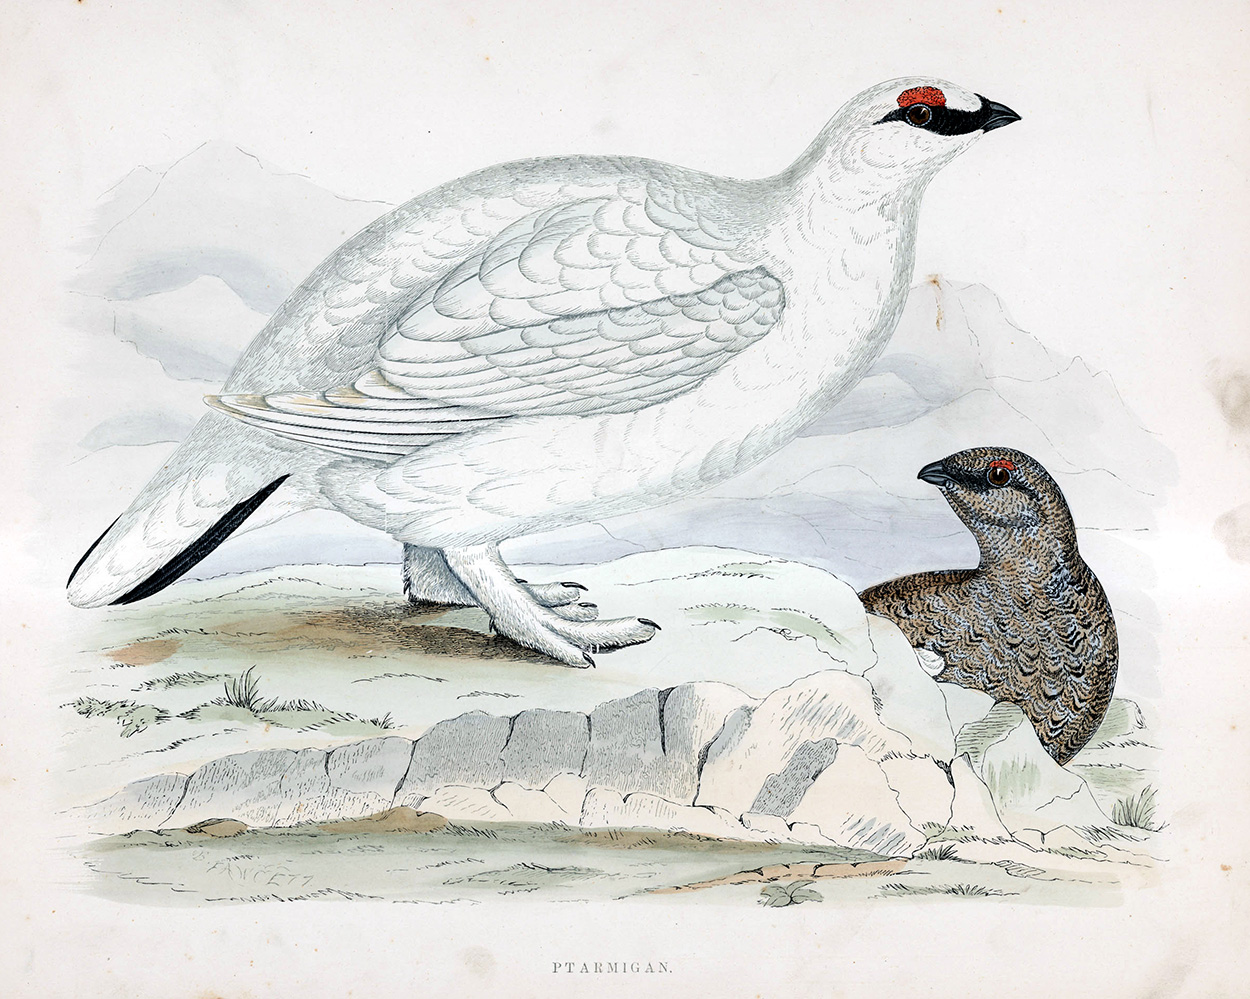 Ptarmigan - hand coloured lithograph 1891 (Print) art by Beverley R Morris at The Illustration Art Gallery